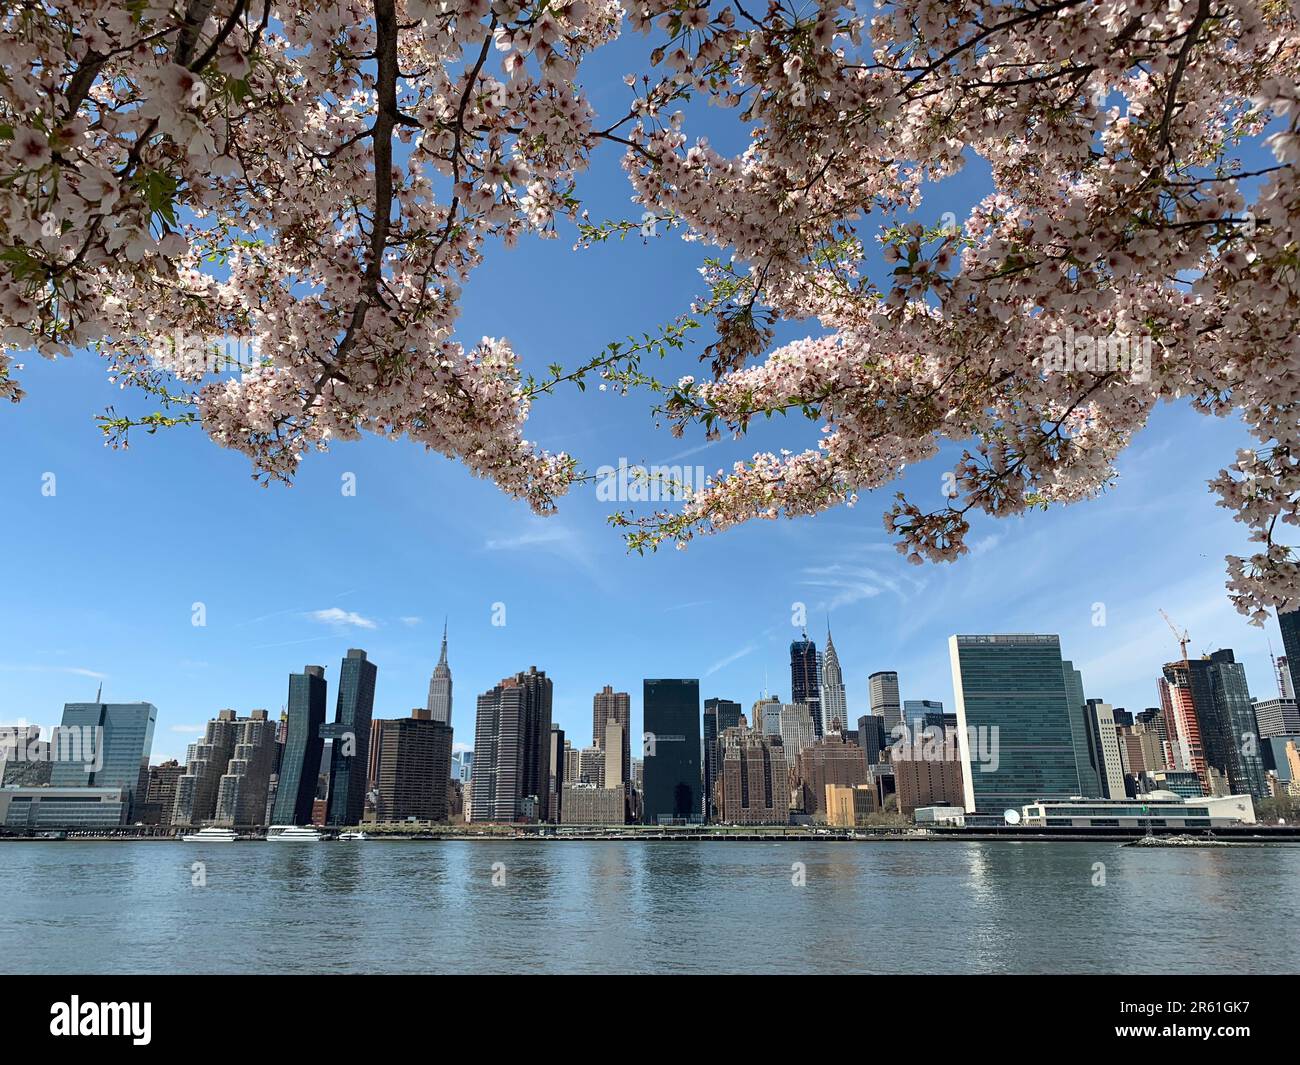 A blooming cherry blossom tree frames the skyline of the financial and business district of Manhattan and New York City Stock Photo